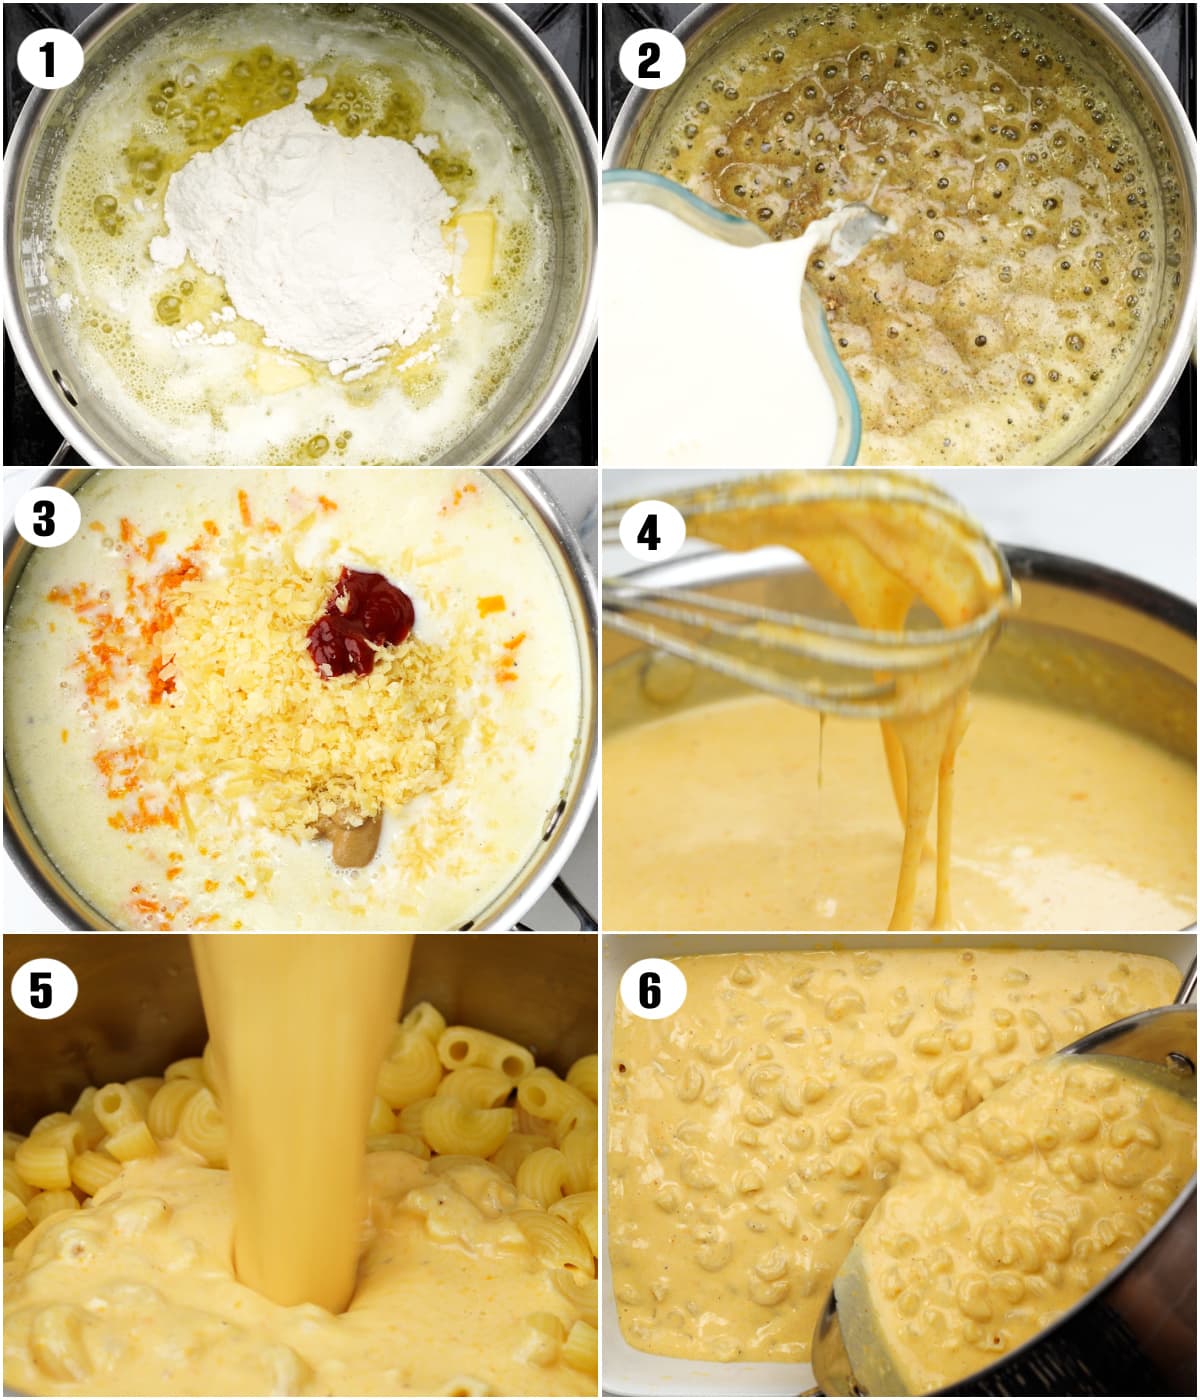 Step by step pictures showing to make baked mac and cheese